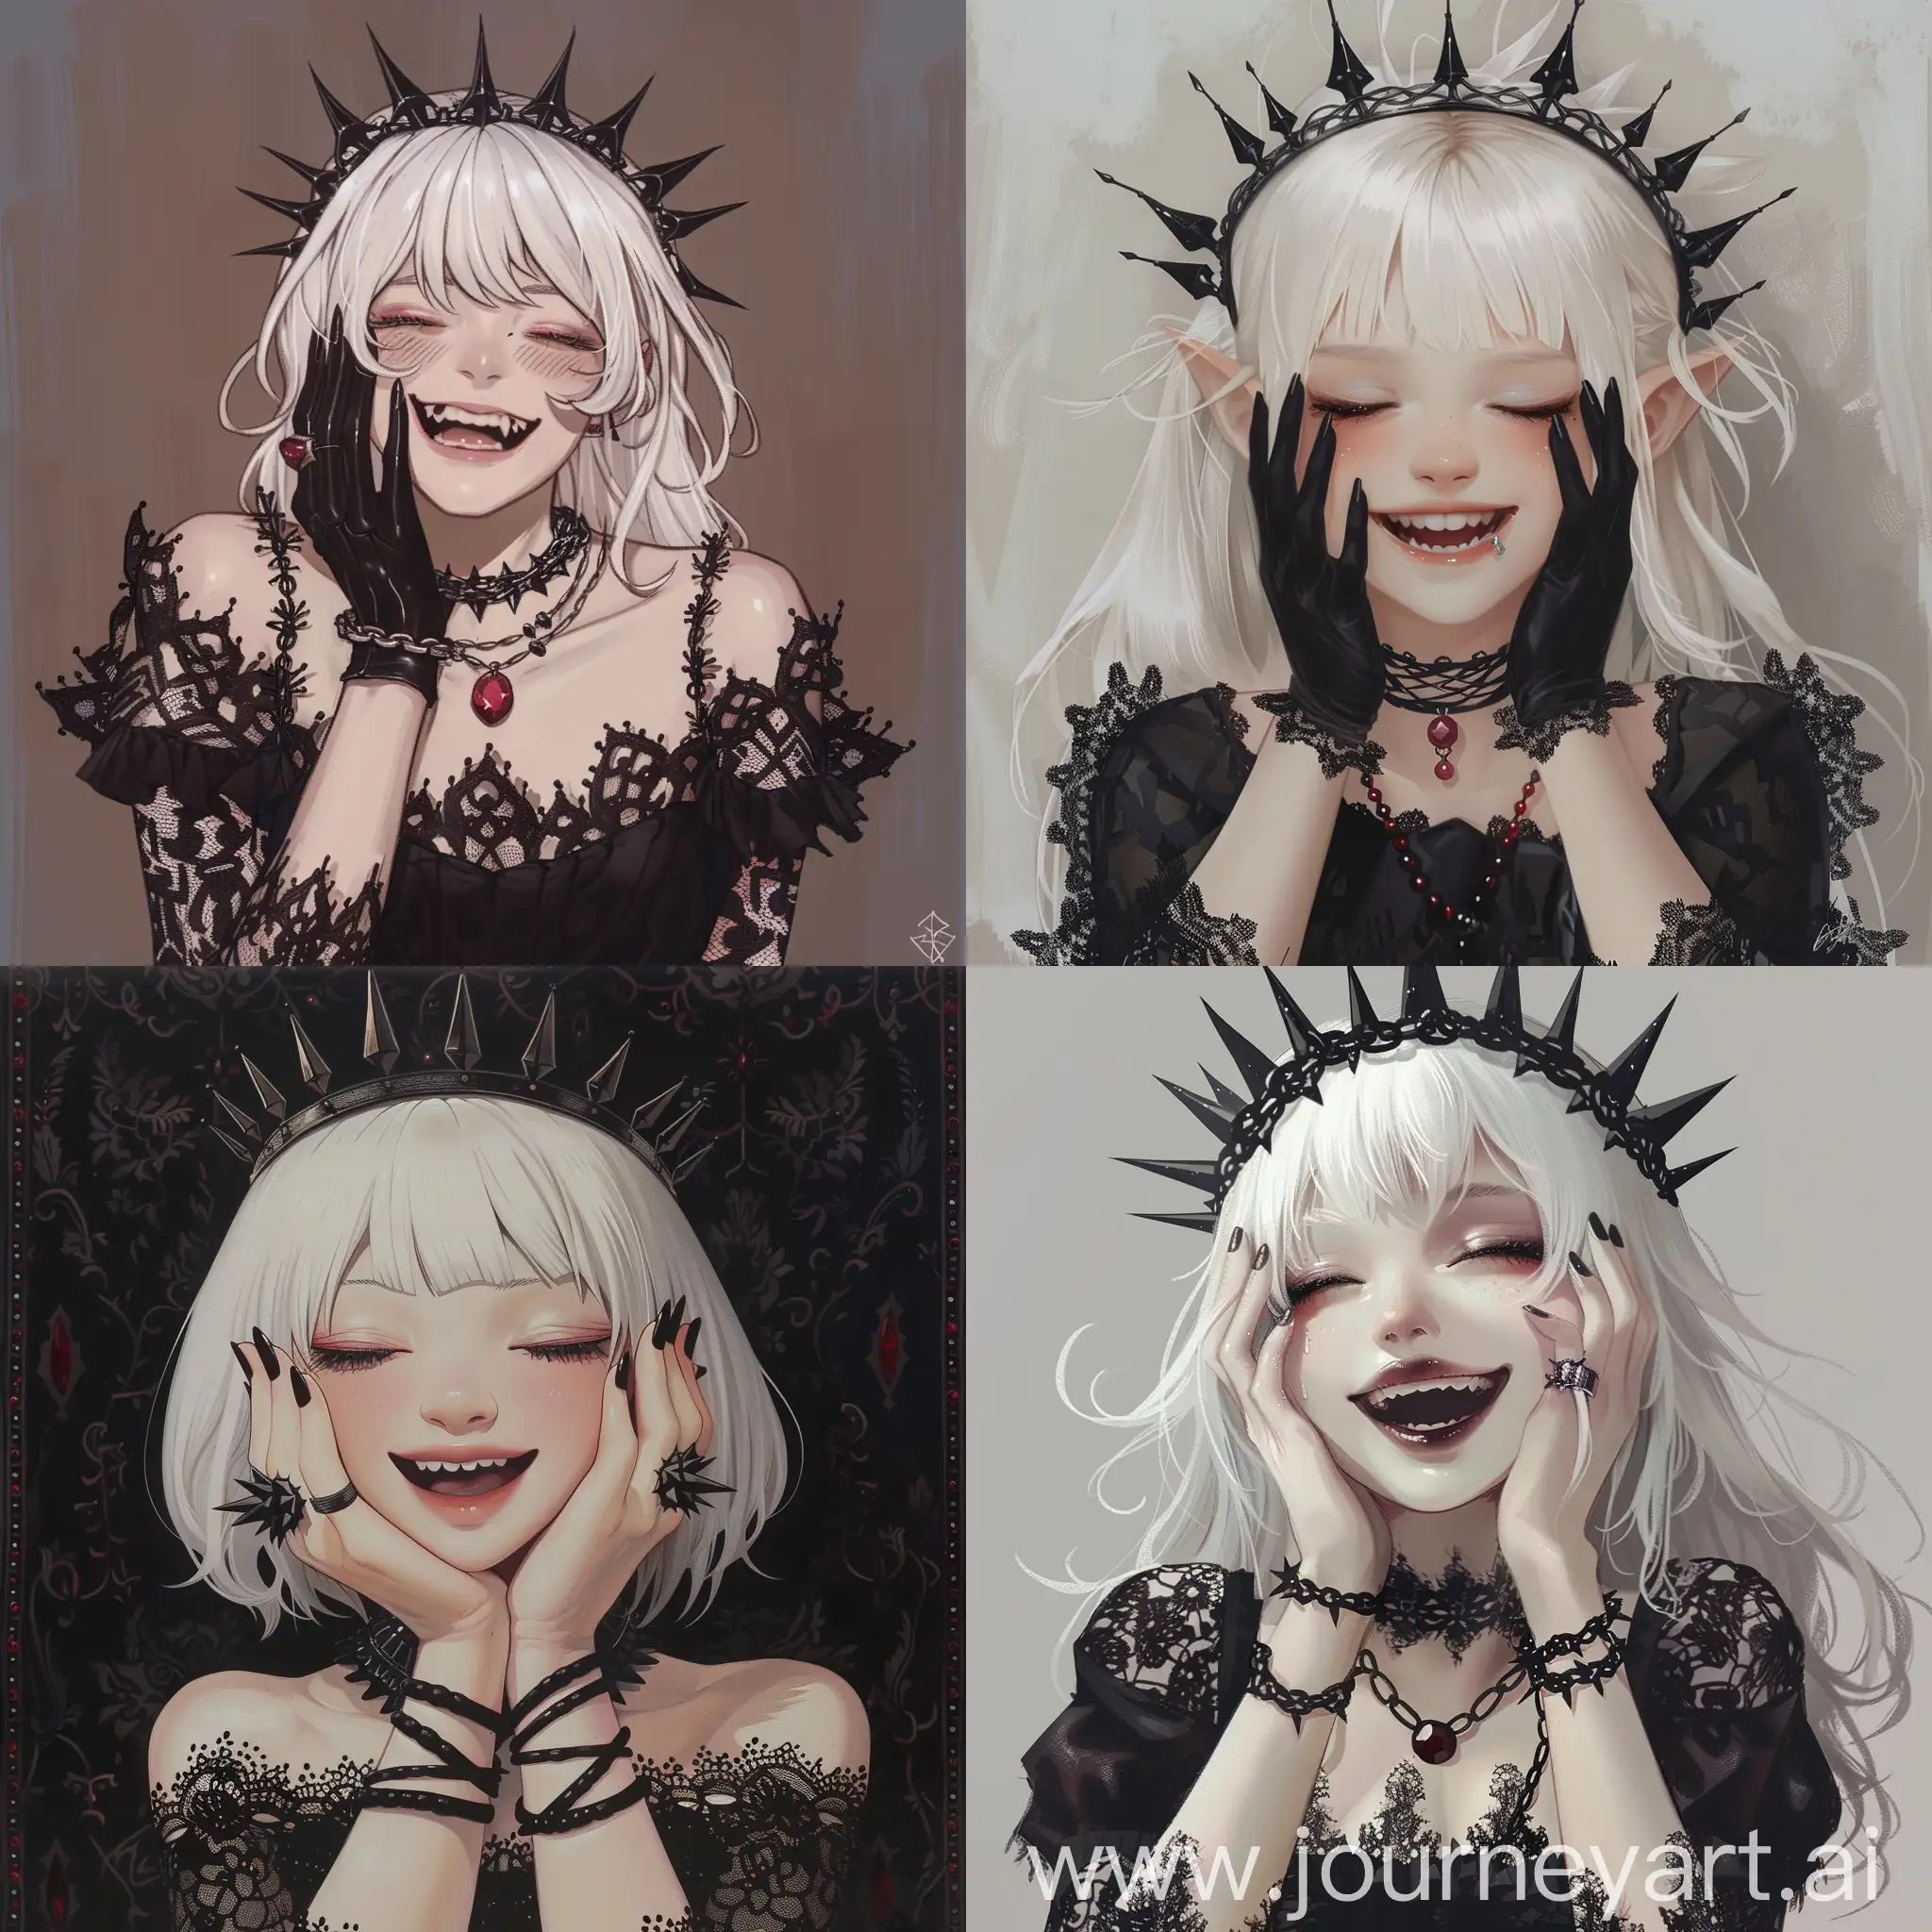 Anime-Portrait-of-Smiling-WhiteHaired-Girl-in-Black-Lace-Dress